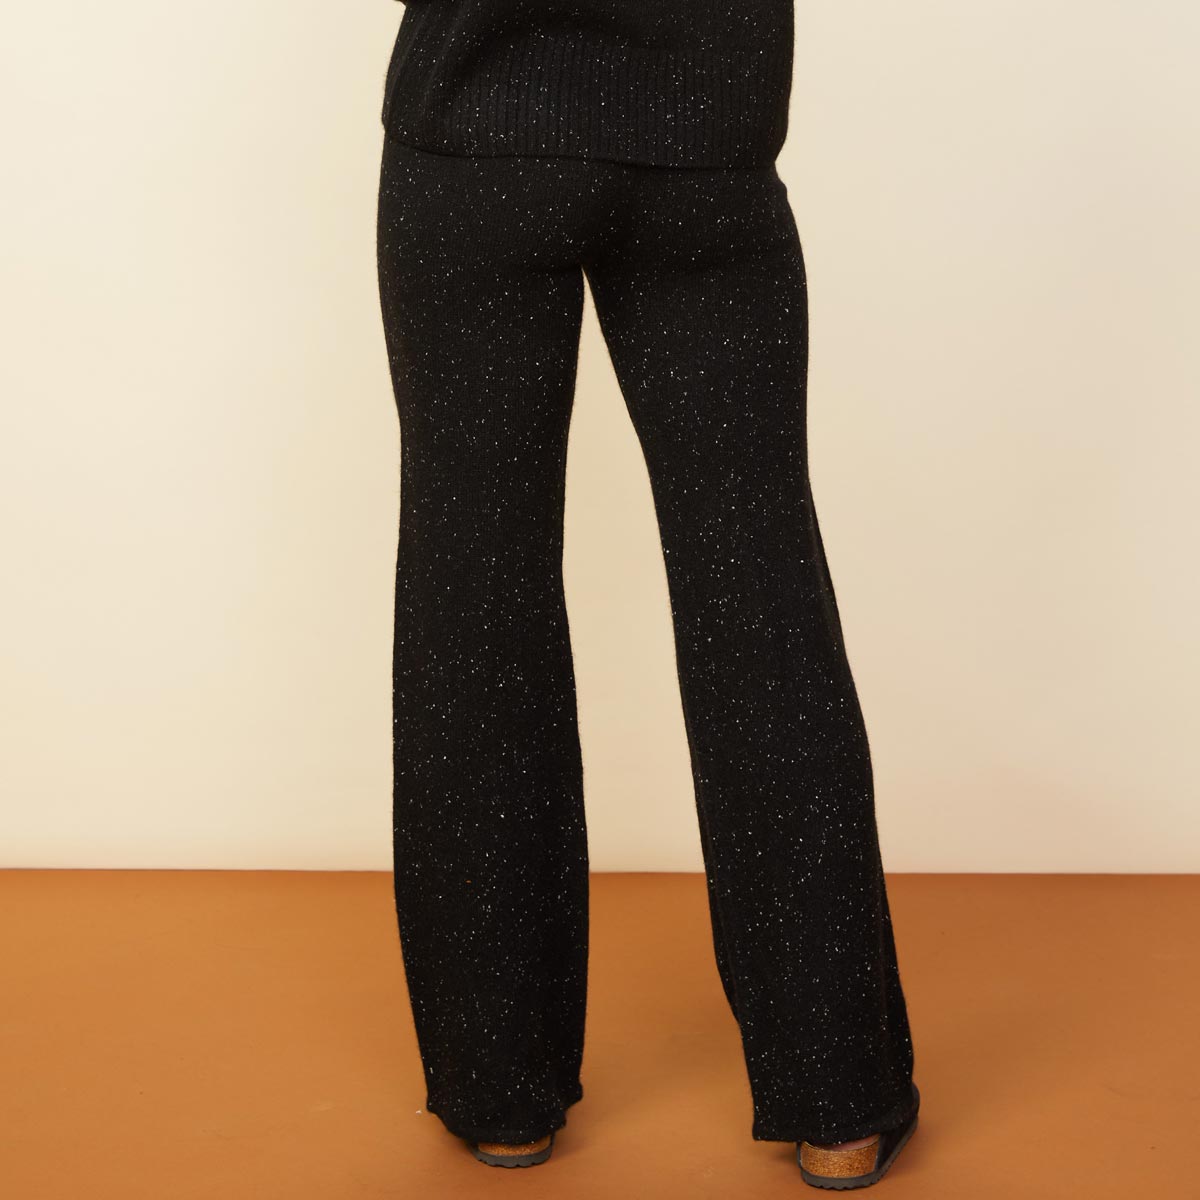 Back view of model wearing the cashmere neps lounge sweats in black.